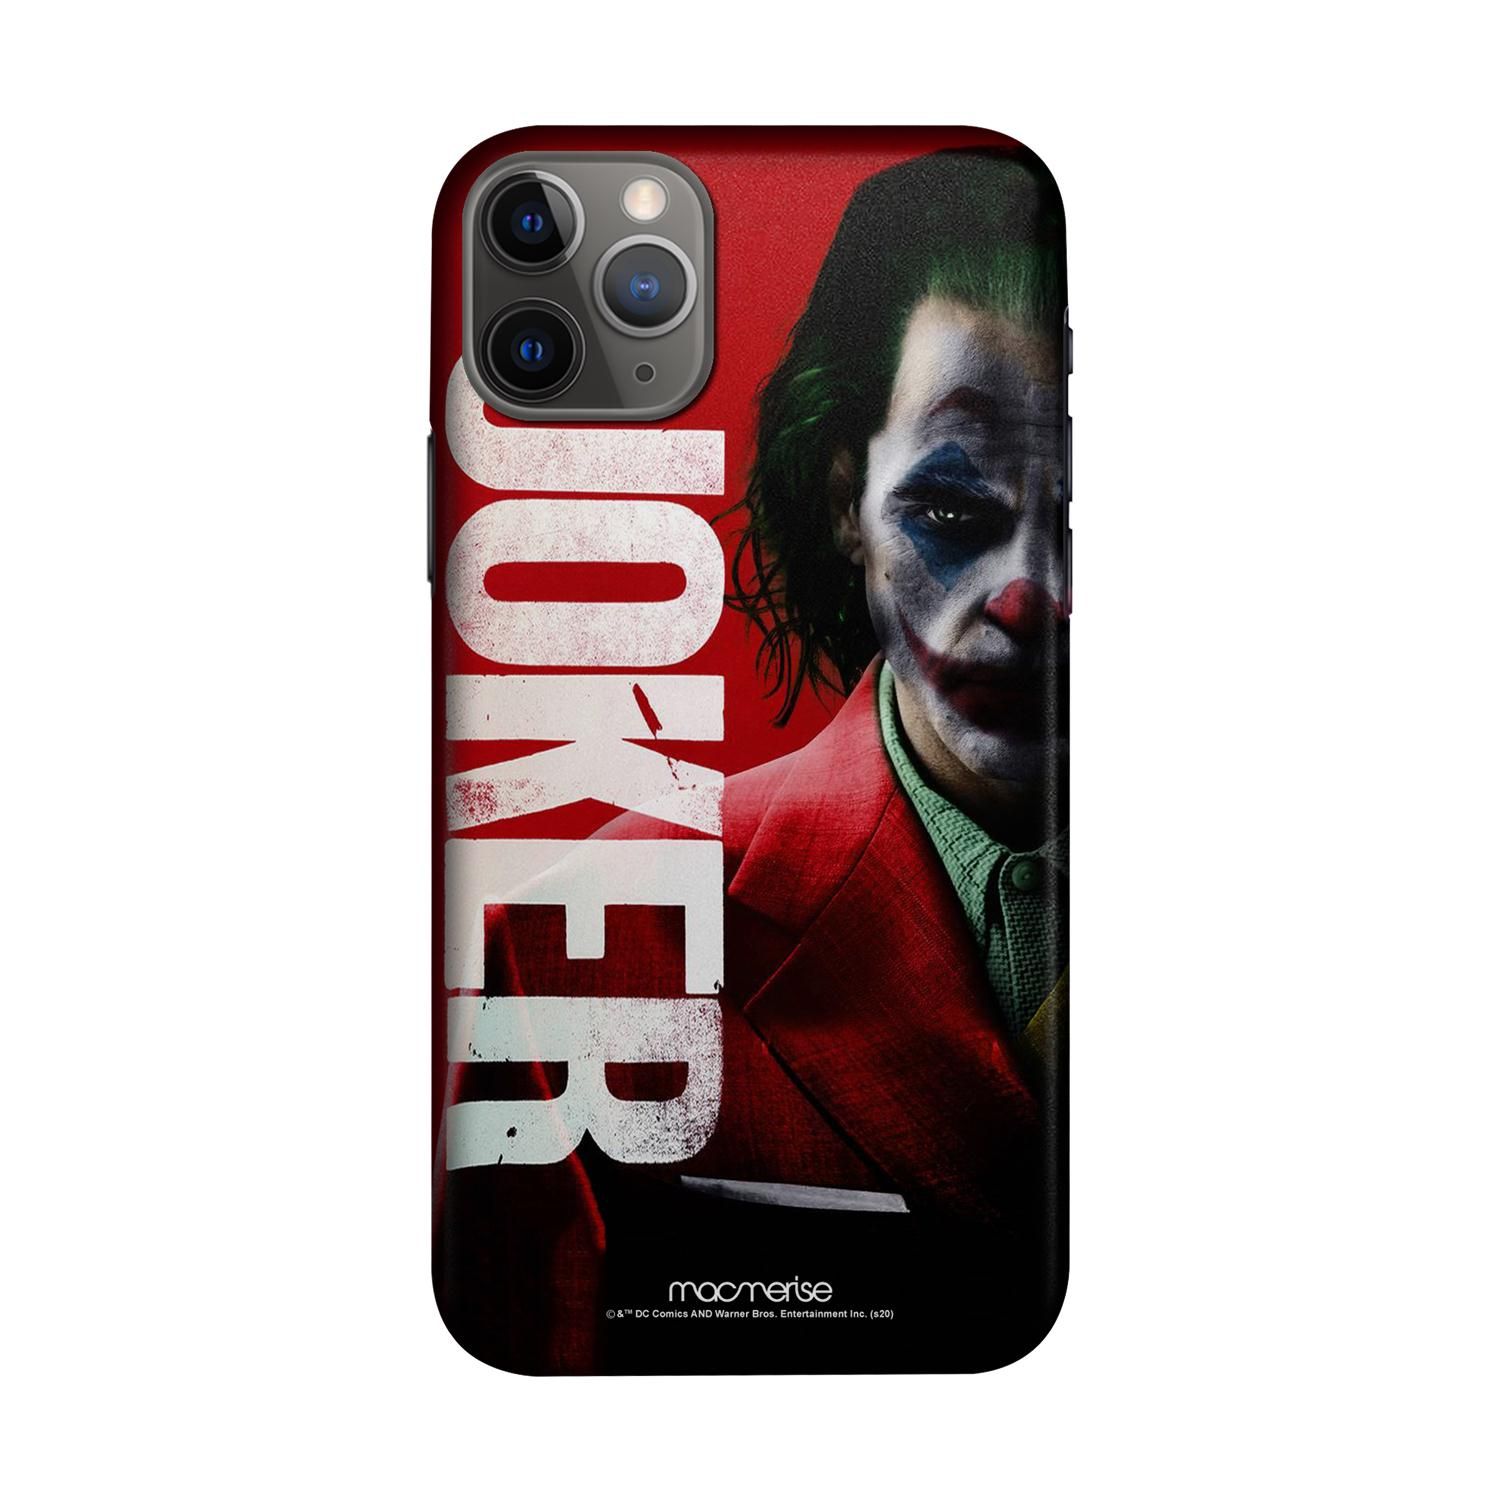 Buy Clown Prince - Sleek Phone Case for iPhone 11 Pro Max Online